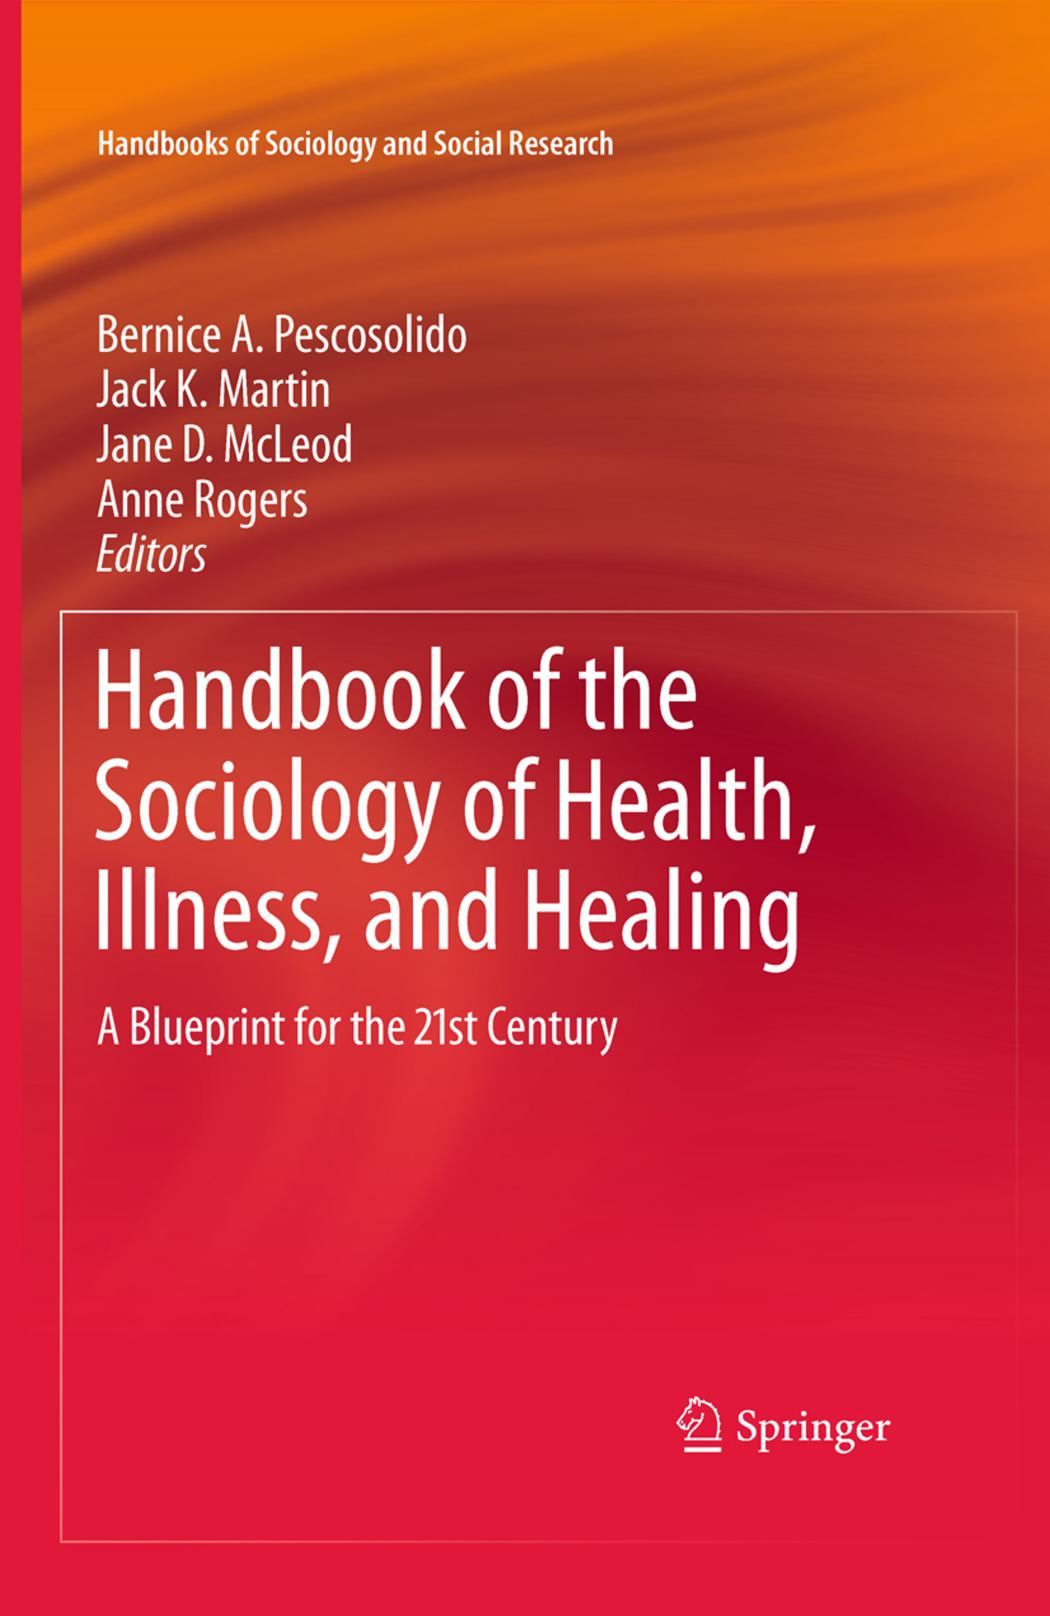 Handbook of the Sociology of Health, Illness, and Healing: A Blueprint for the 21st Century (Handbooks of Sociology and Social Research)